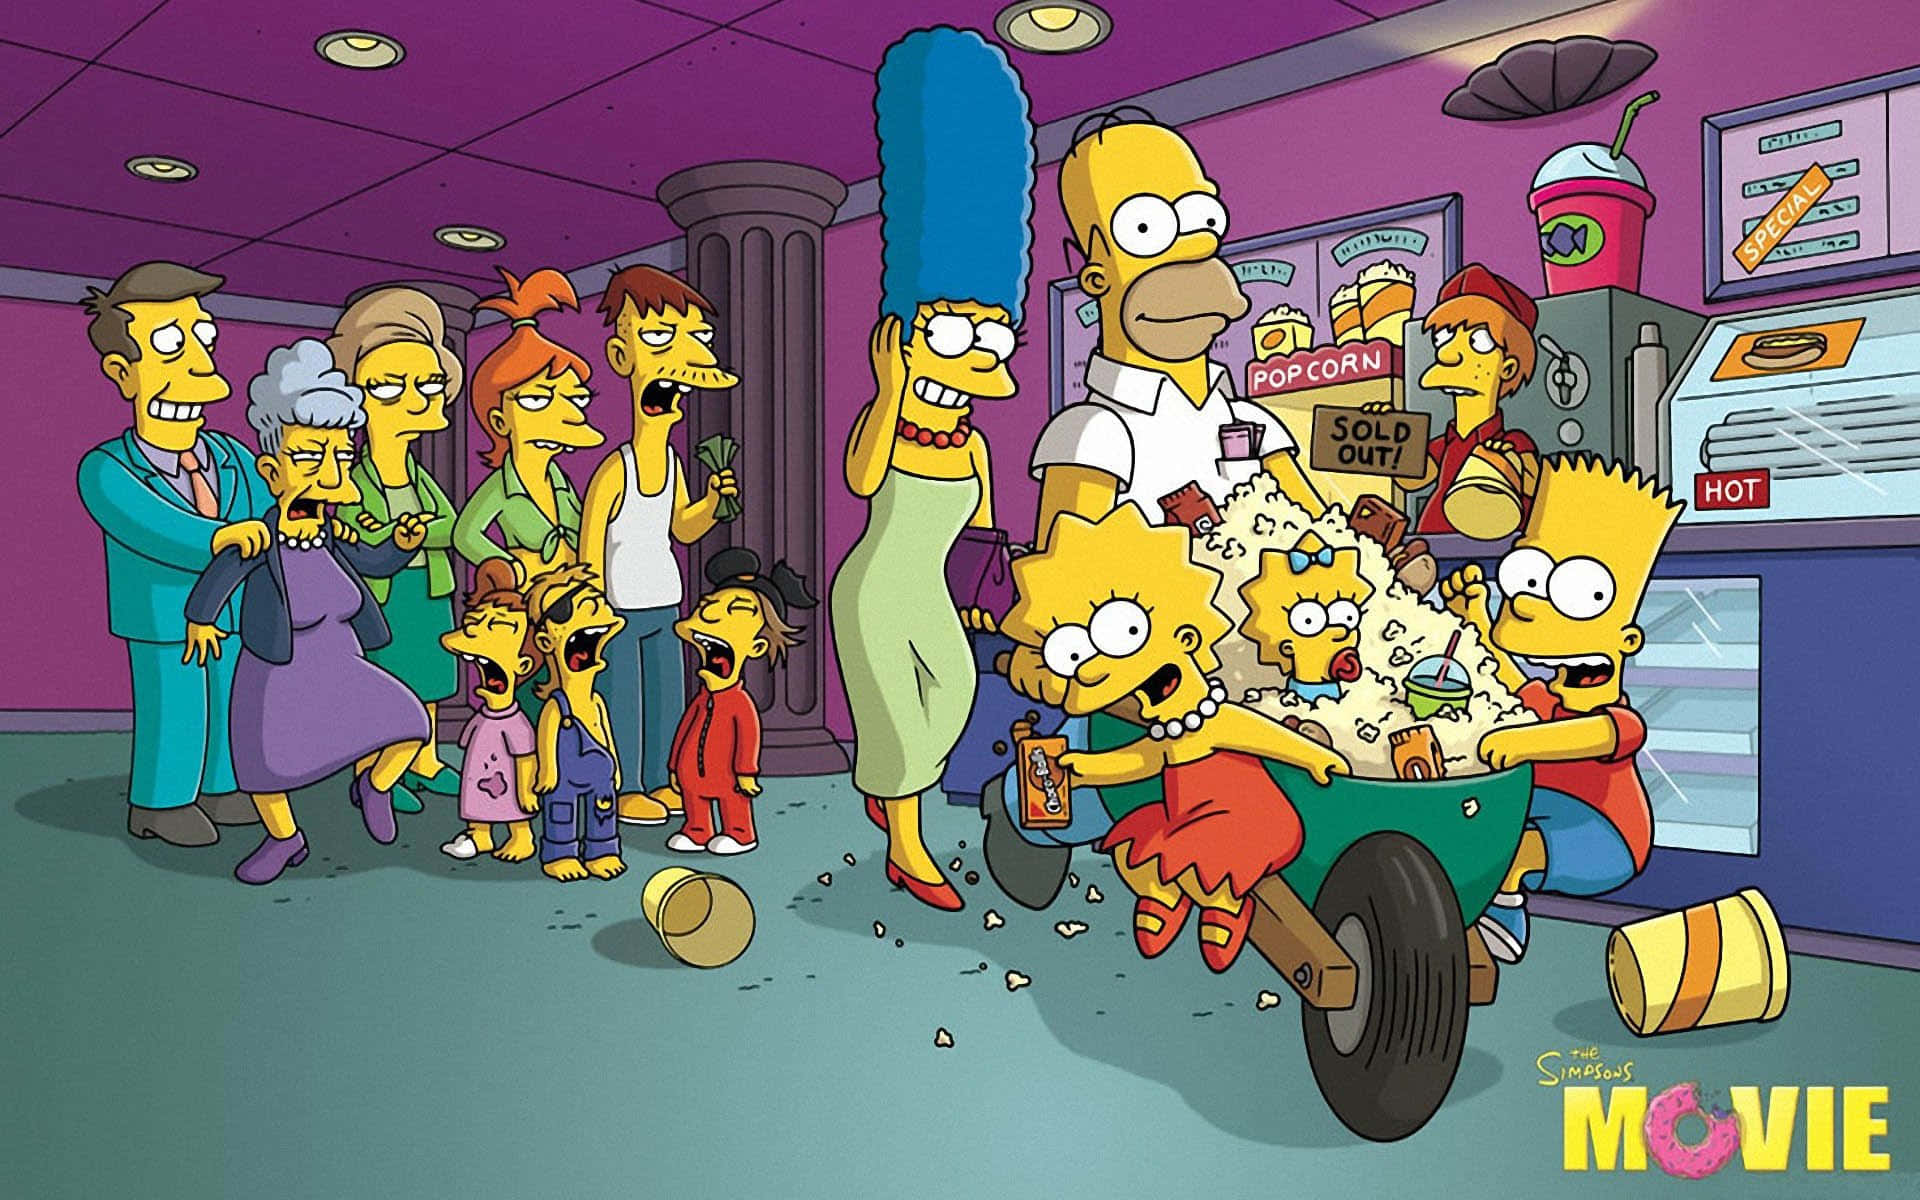 The Beloved Cartoon Family - The Simpsons